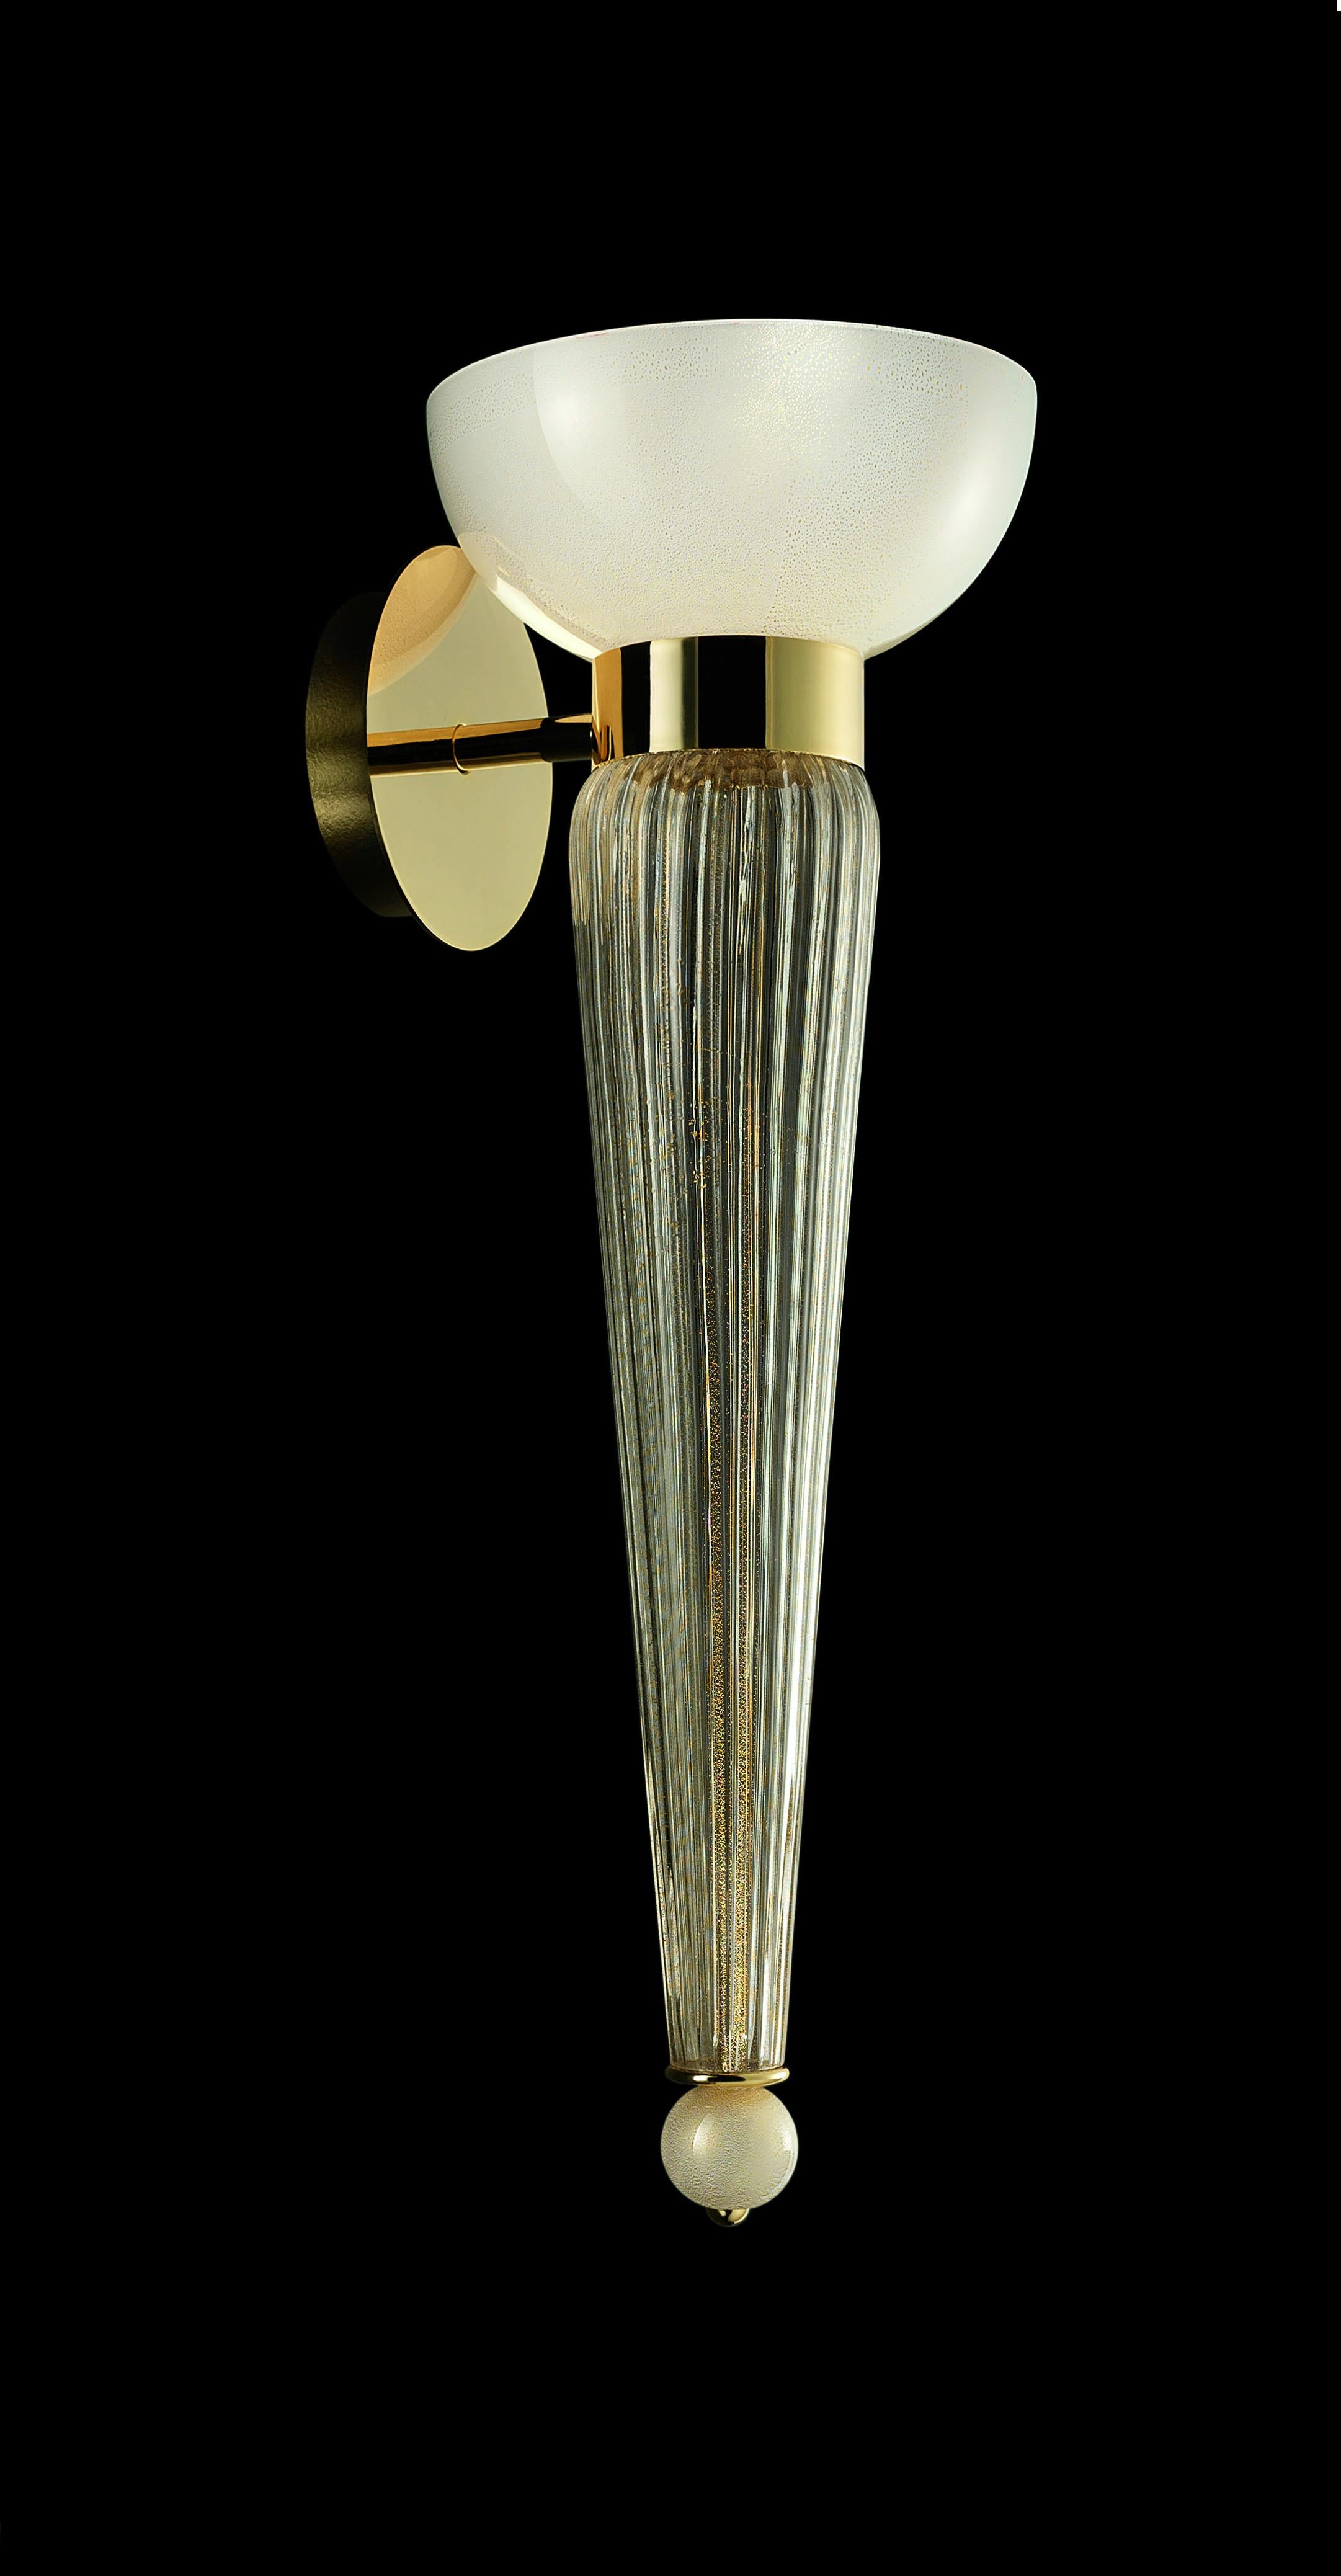 Beige (Beige Gold_OB) Torvik 5656 Wall Sconce in Glass with Galvanized Gold Finish, by Barovier&Toso 4